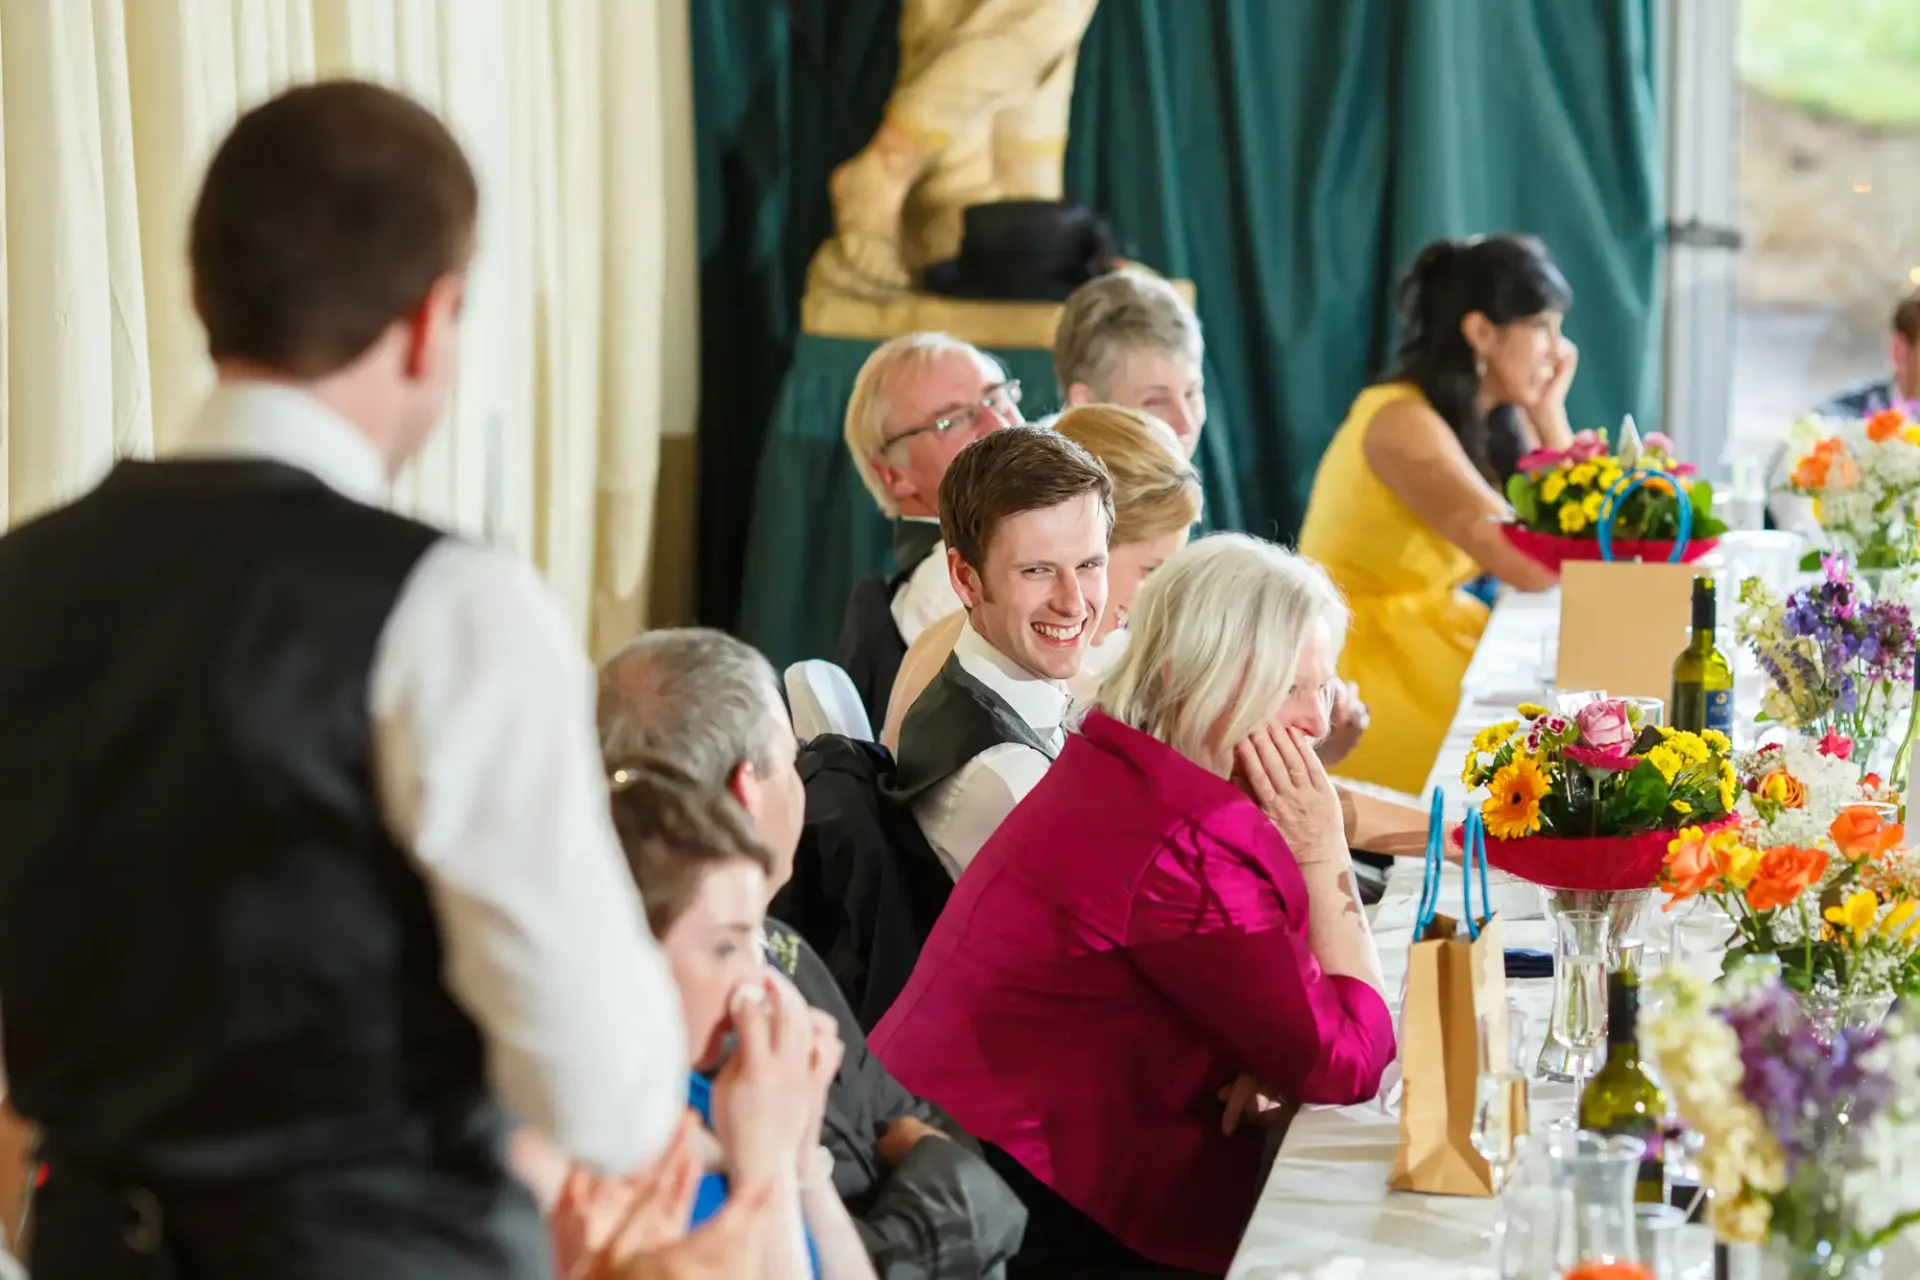 Guests enjoying conversation at a lively wedding reception table decorated with colorful flowers.